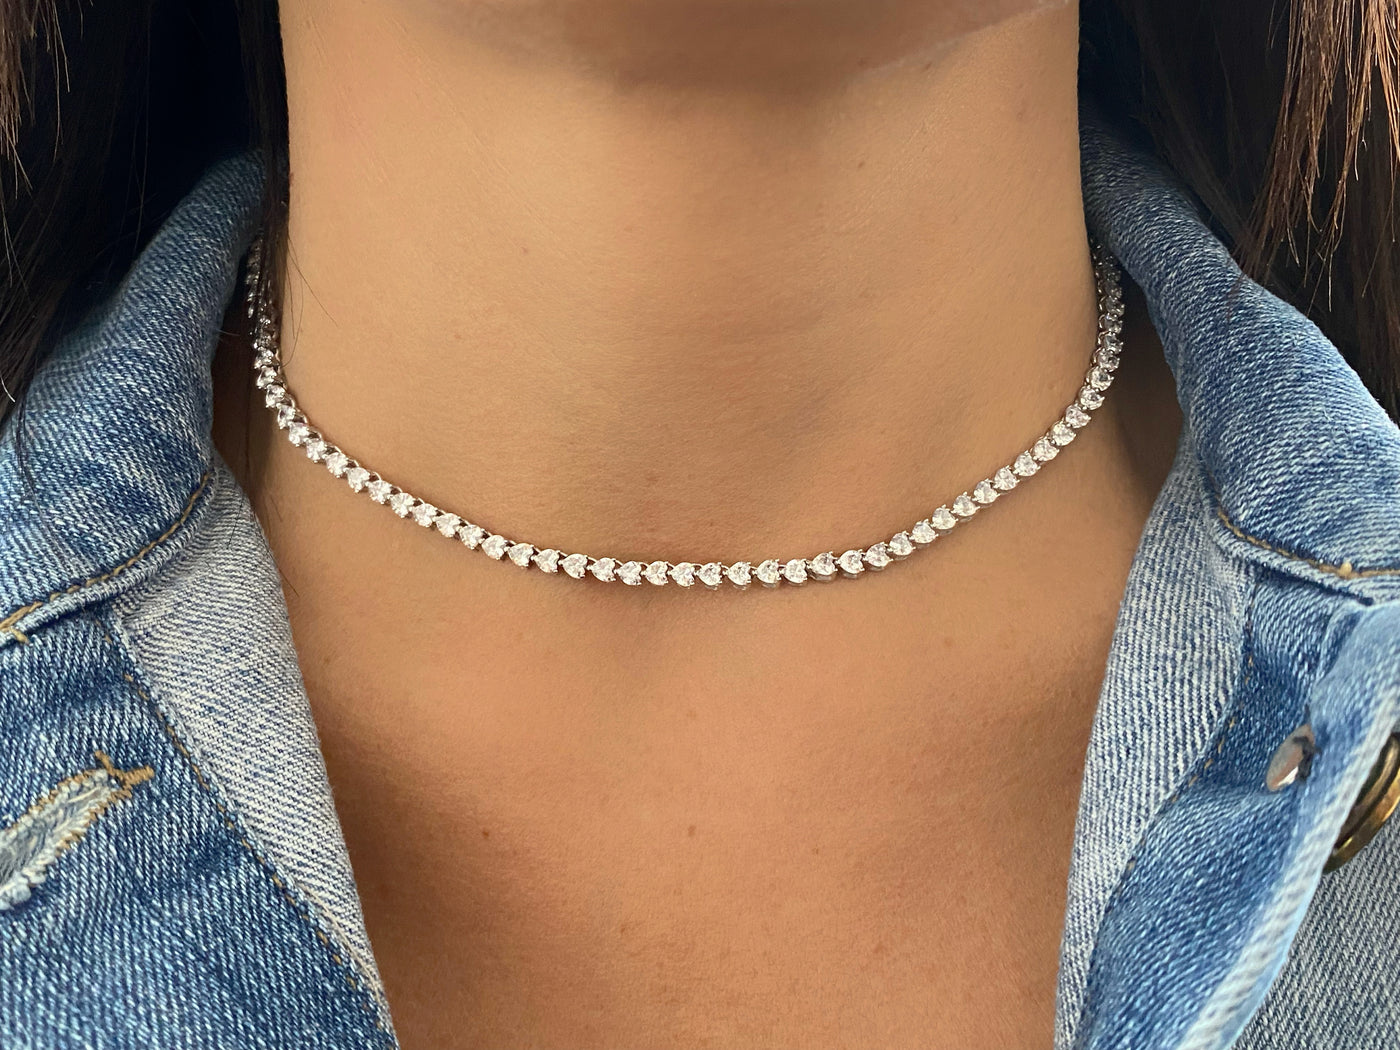 Silver tennis choker with white hearts